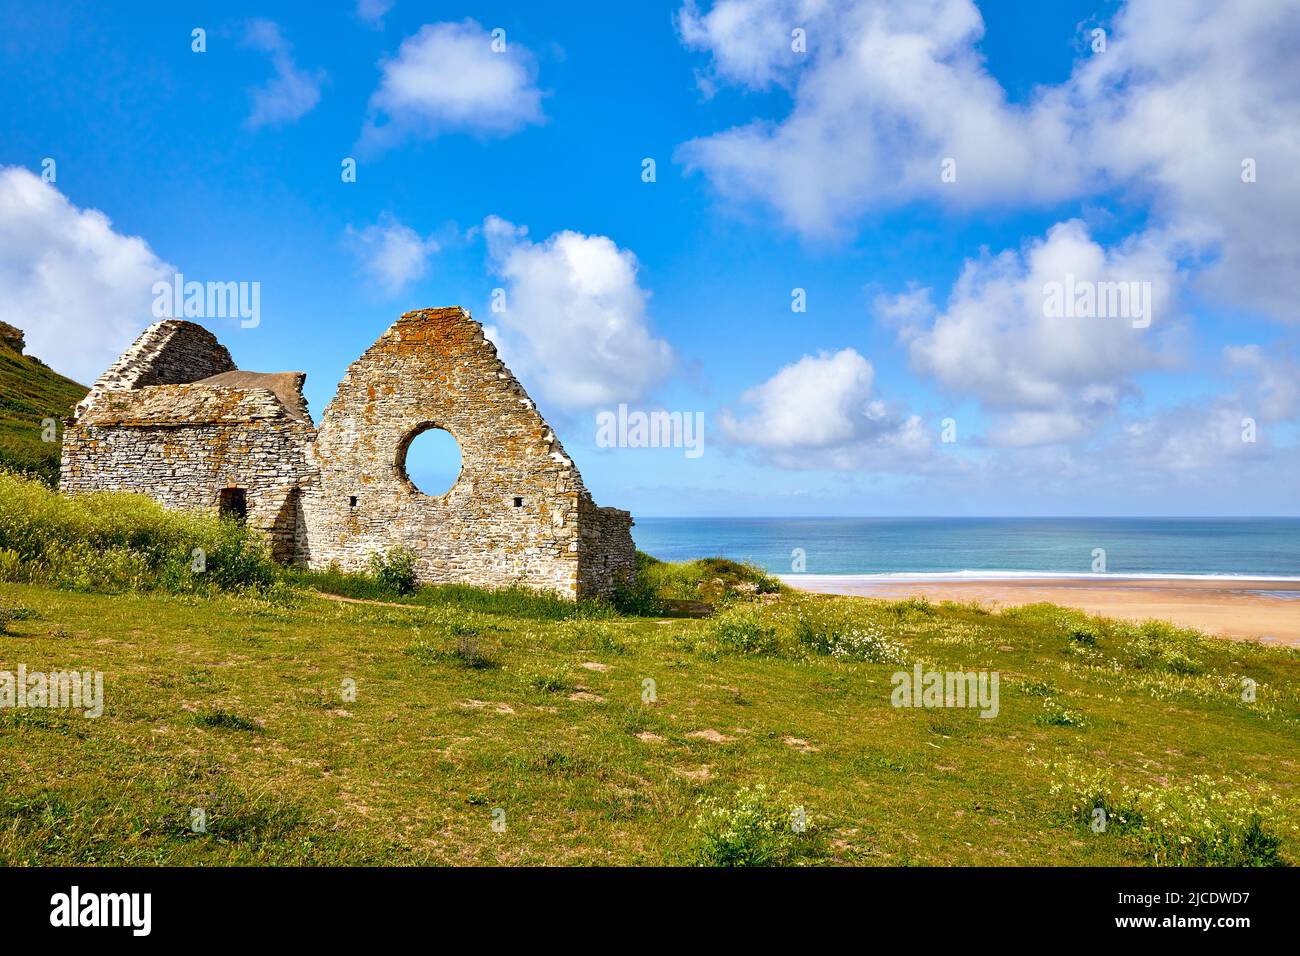 Image of Vielle Eglise, beach, sea and sand dunes.Carteret, Normandy, France Stock Photo